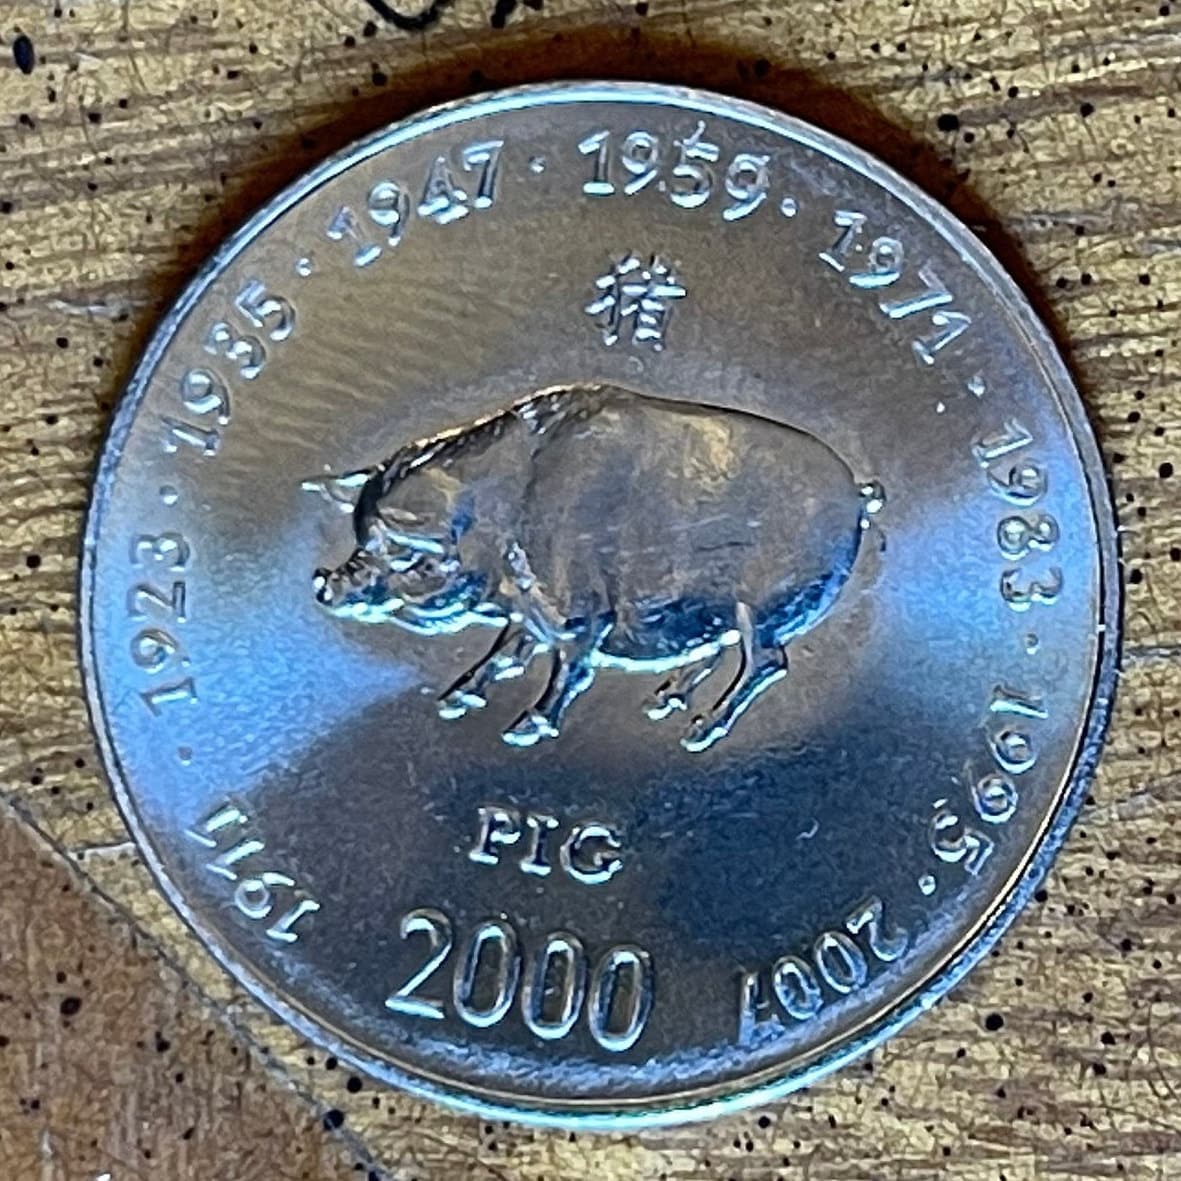 Year of the Pig Chinese Zodiac 10 Shillings Somalia Authentic Coin Money for Jewelry and Craft Making (2000)